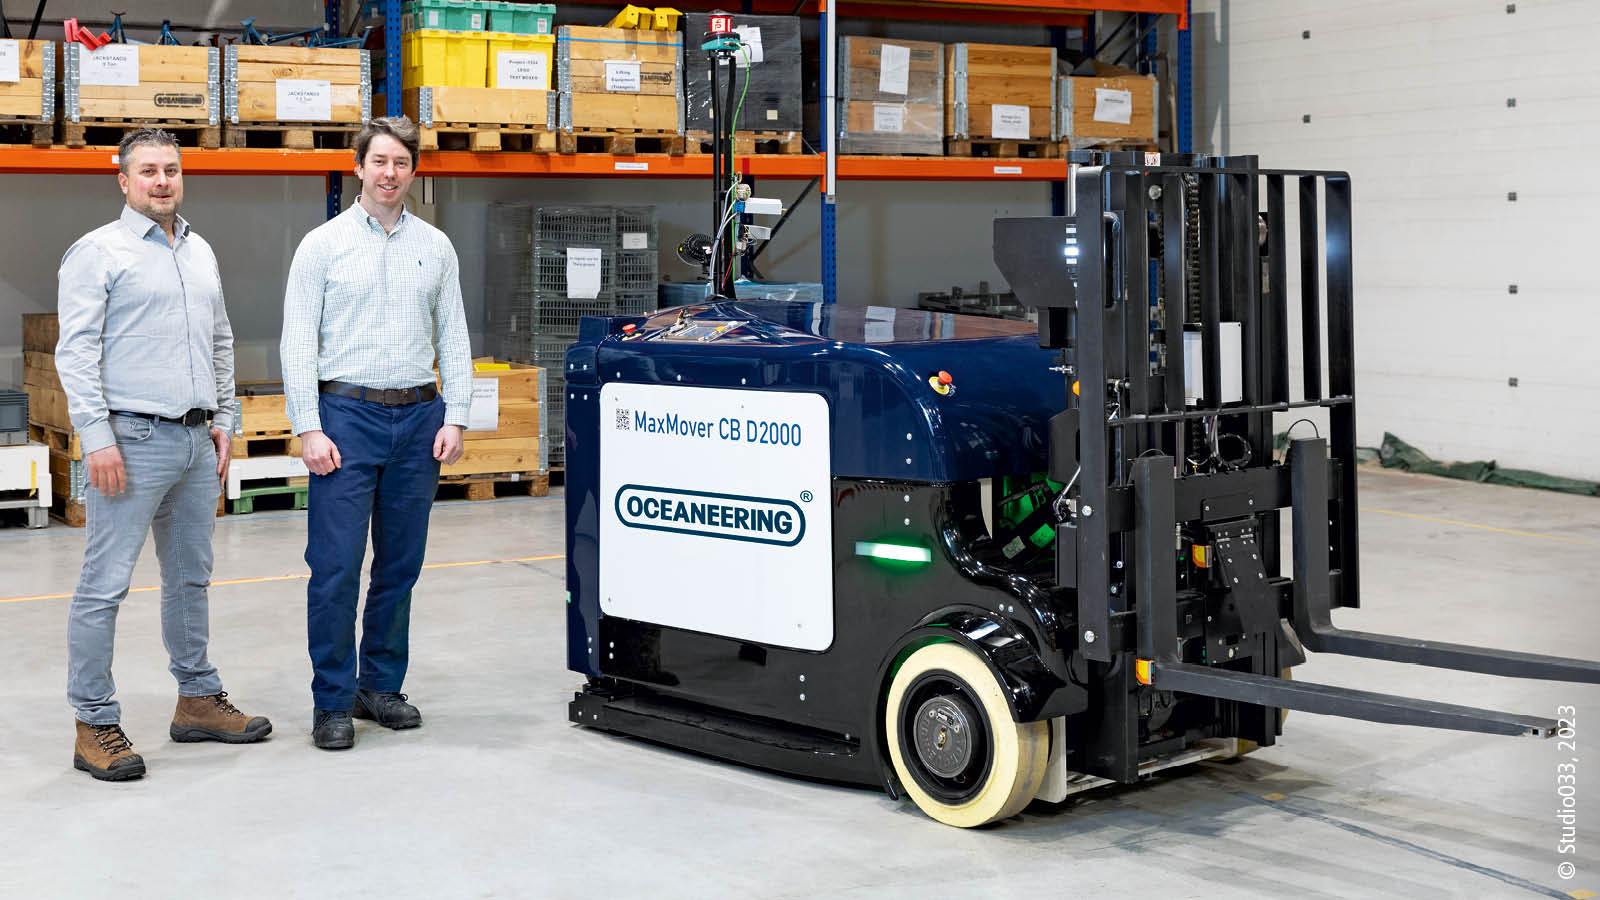 At the OMR office in The Netherlands: Dr. Gareth Jones (right), Manager of Technology for Oceaneering Mobile Robotics, and Stefan Dubbeldeman, Sales Engineer, Beckhoff Automation B.V., stand alongside a MaxMover™ CB D 2000 counterbalance forklift.  